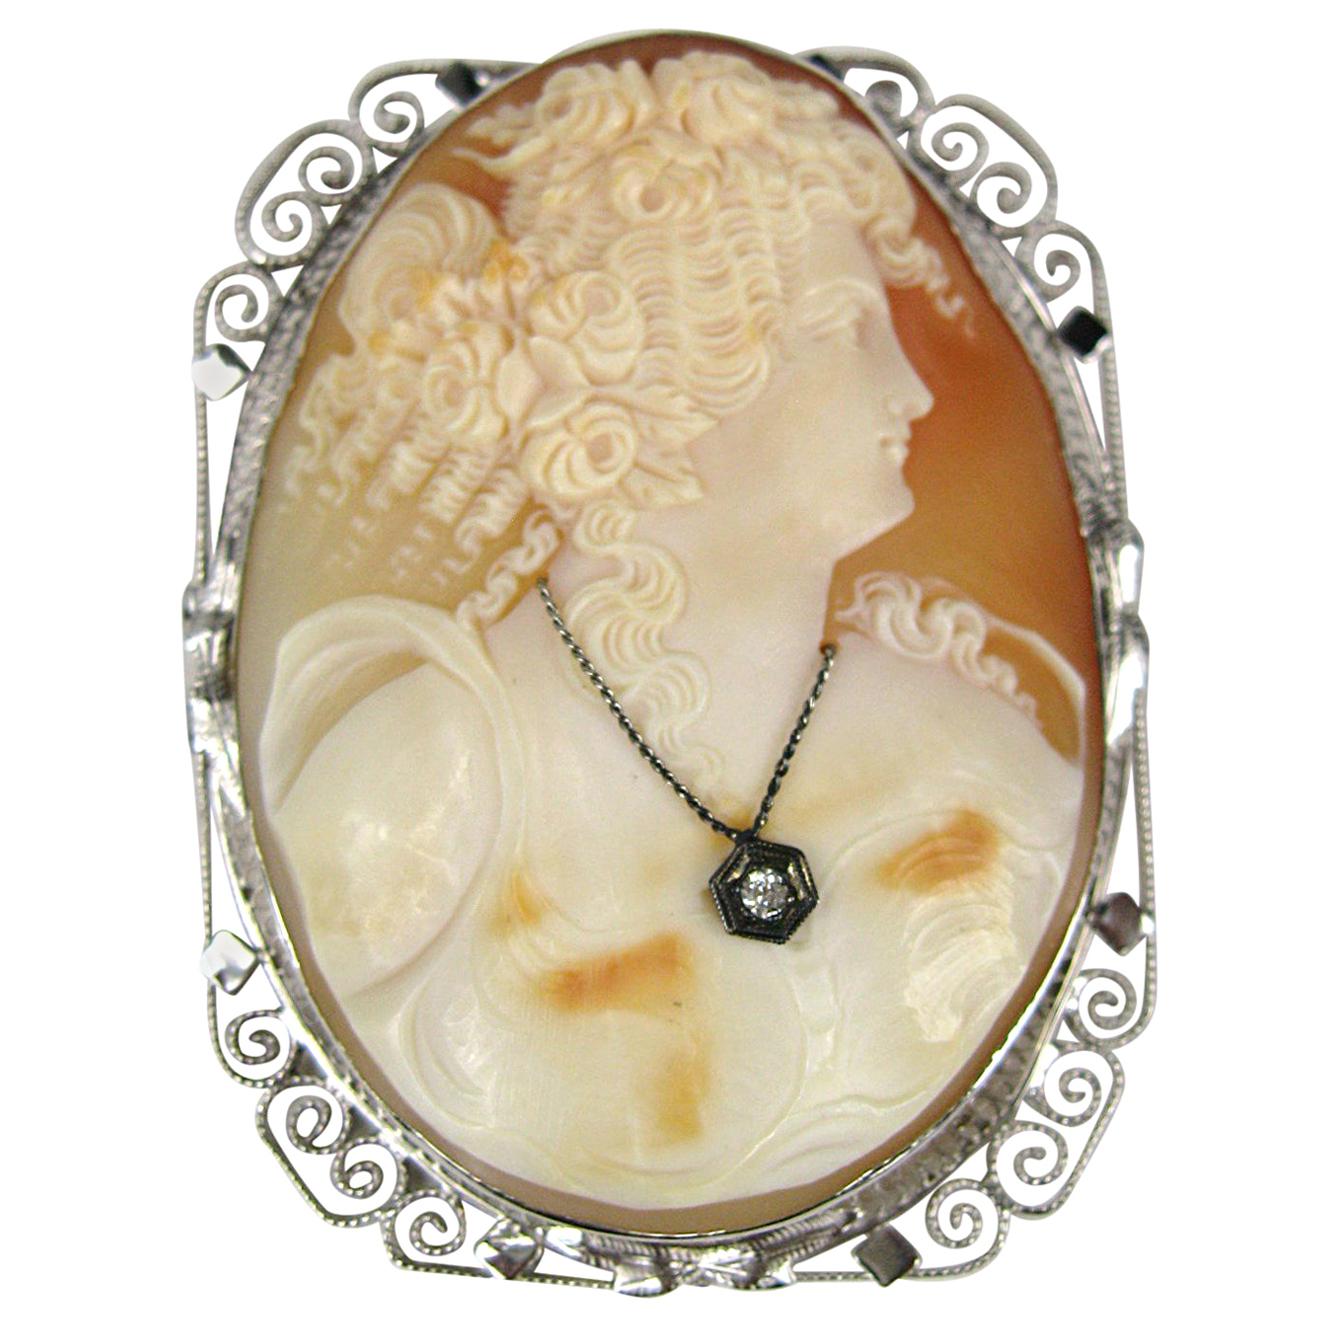  Antique Shell Cameo White Gold Brooch Pendant w/ Diamond  For Sale